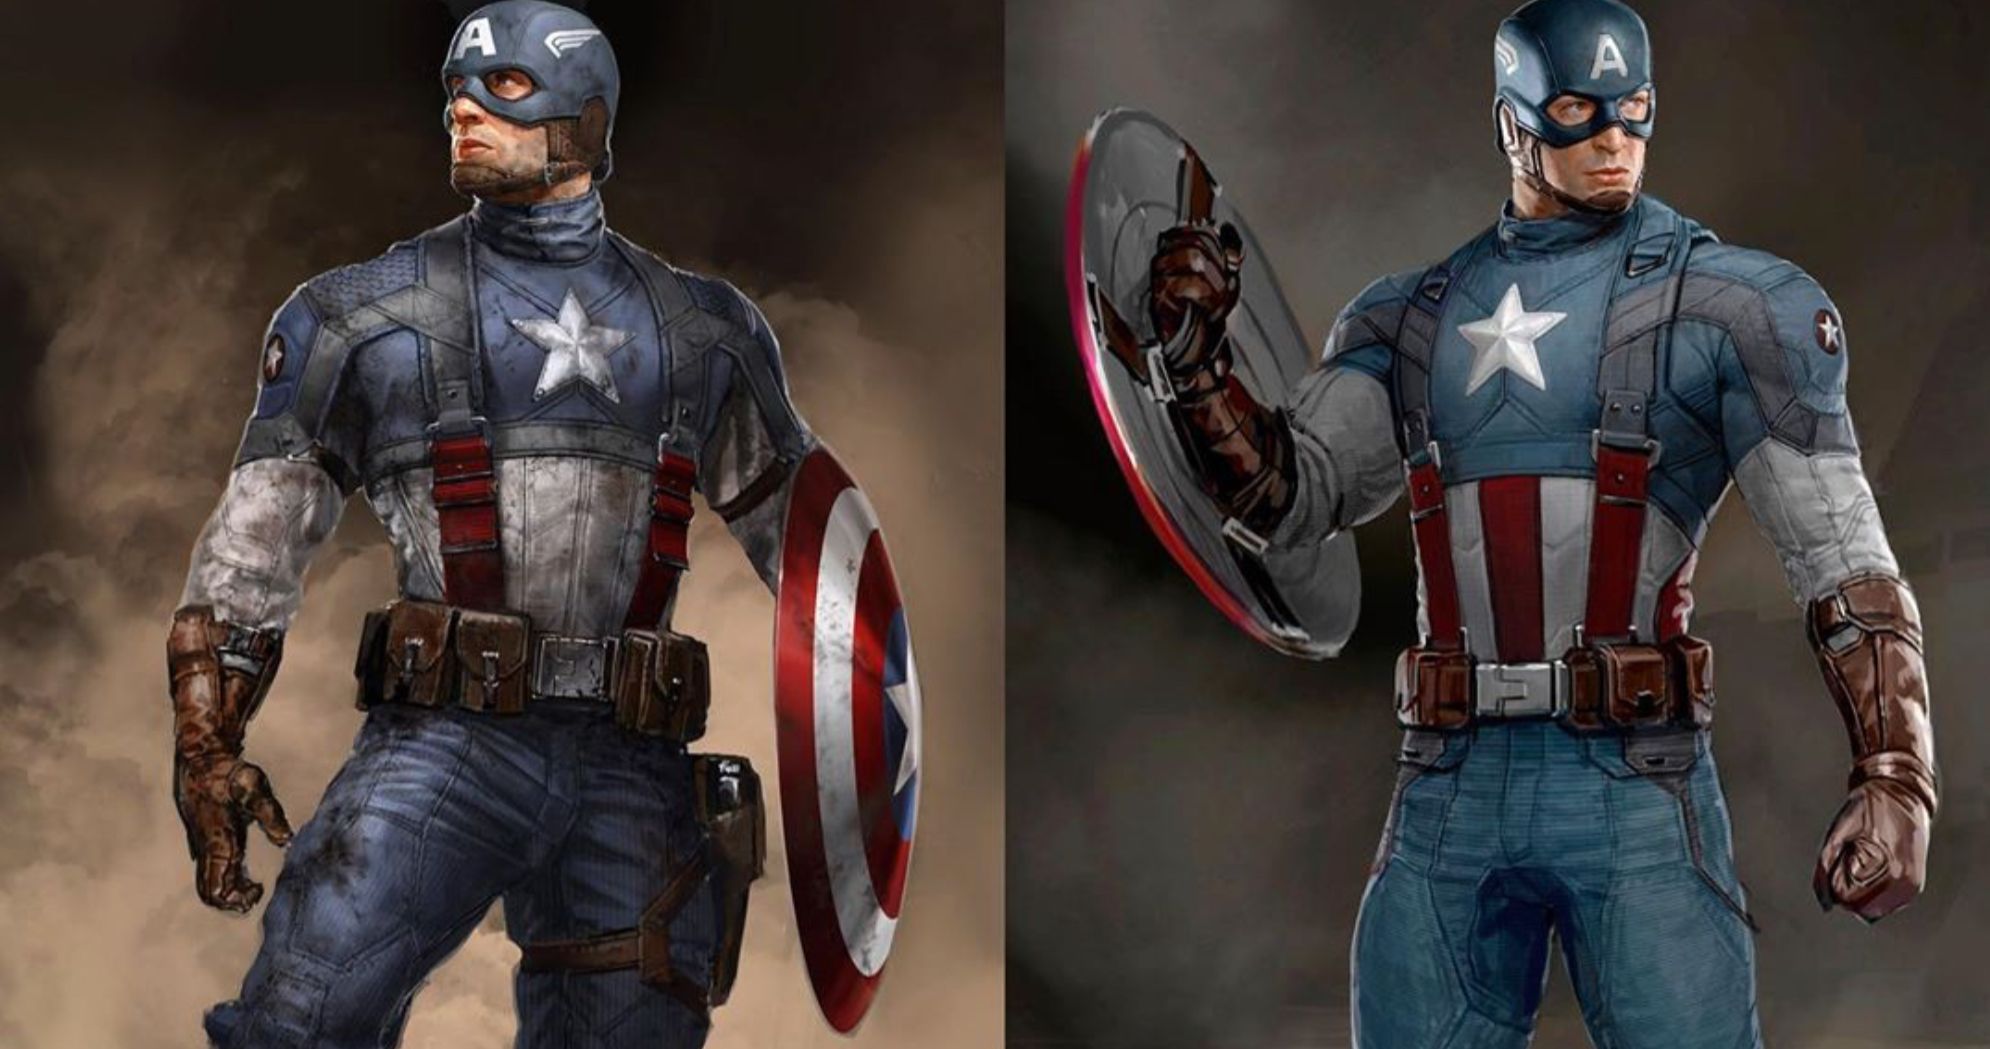 Captain America Art Shows Suit Changes Between First Avenger and Winter Soldier